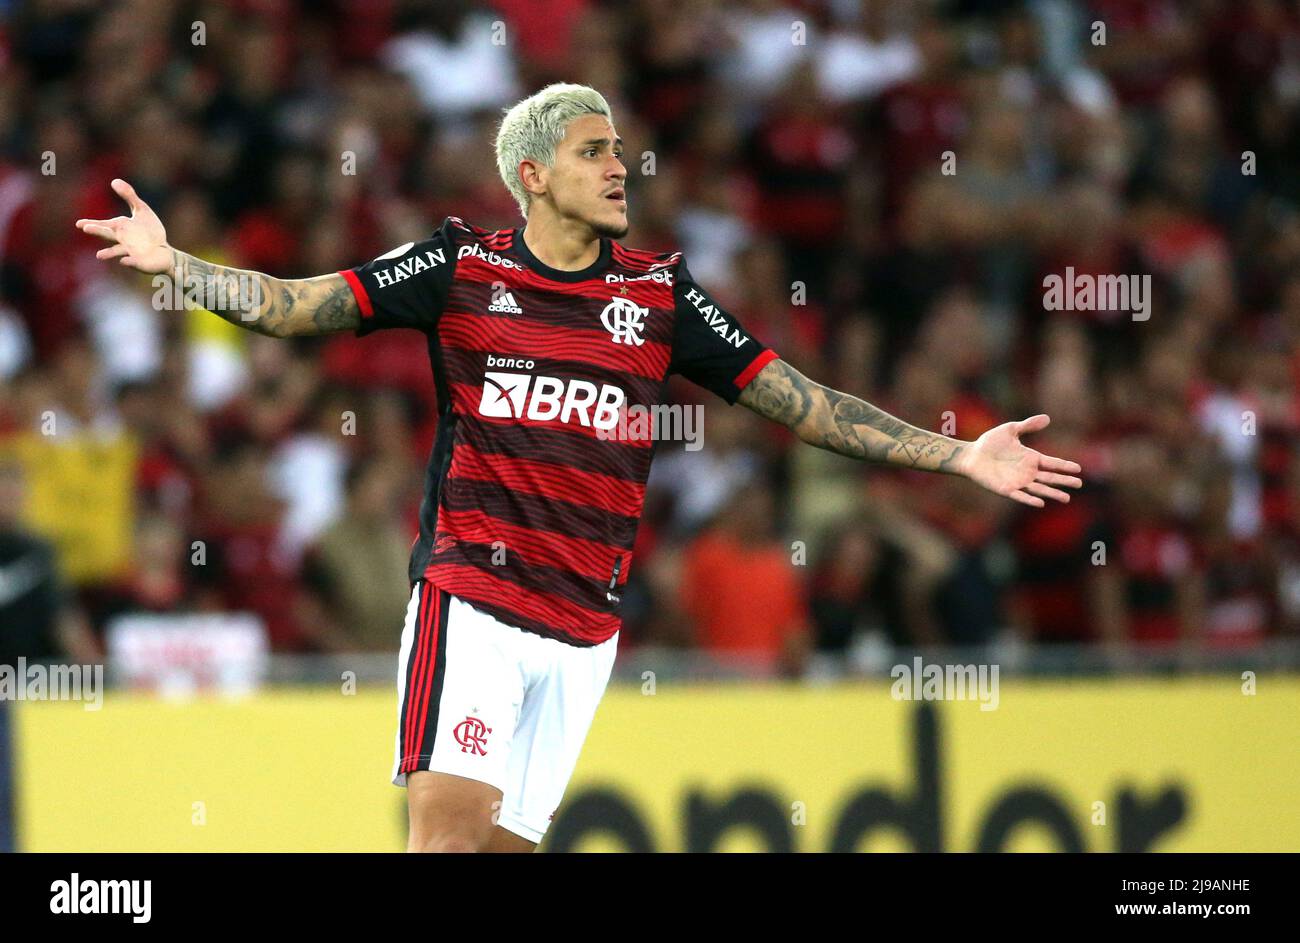 RIO DE JANEIRO, BRAZIL - MAY 21: Pedro Raul of Goias heads the ball against  Pablo of Flamengo ,during the match between Flamengo and Goias as part of  Brasileirao Series A 2022